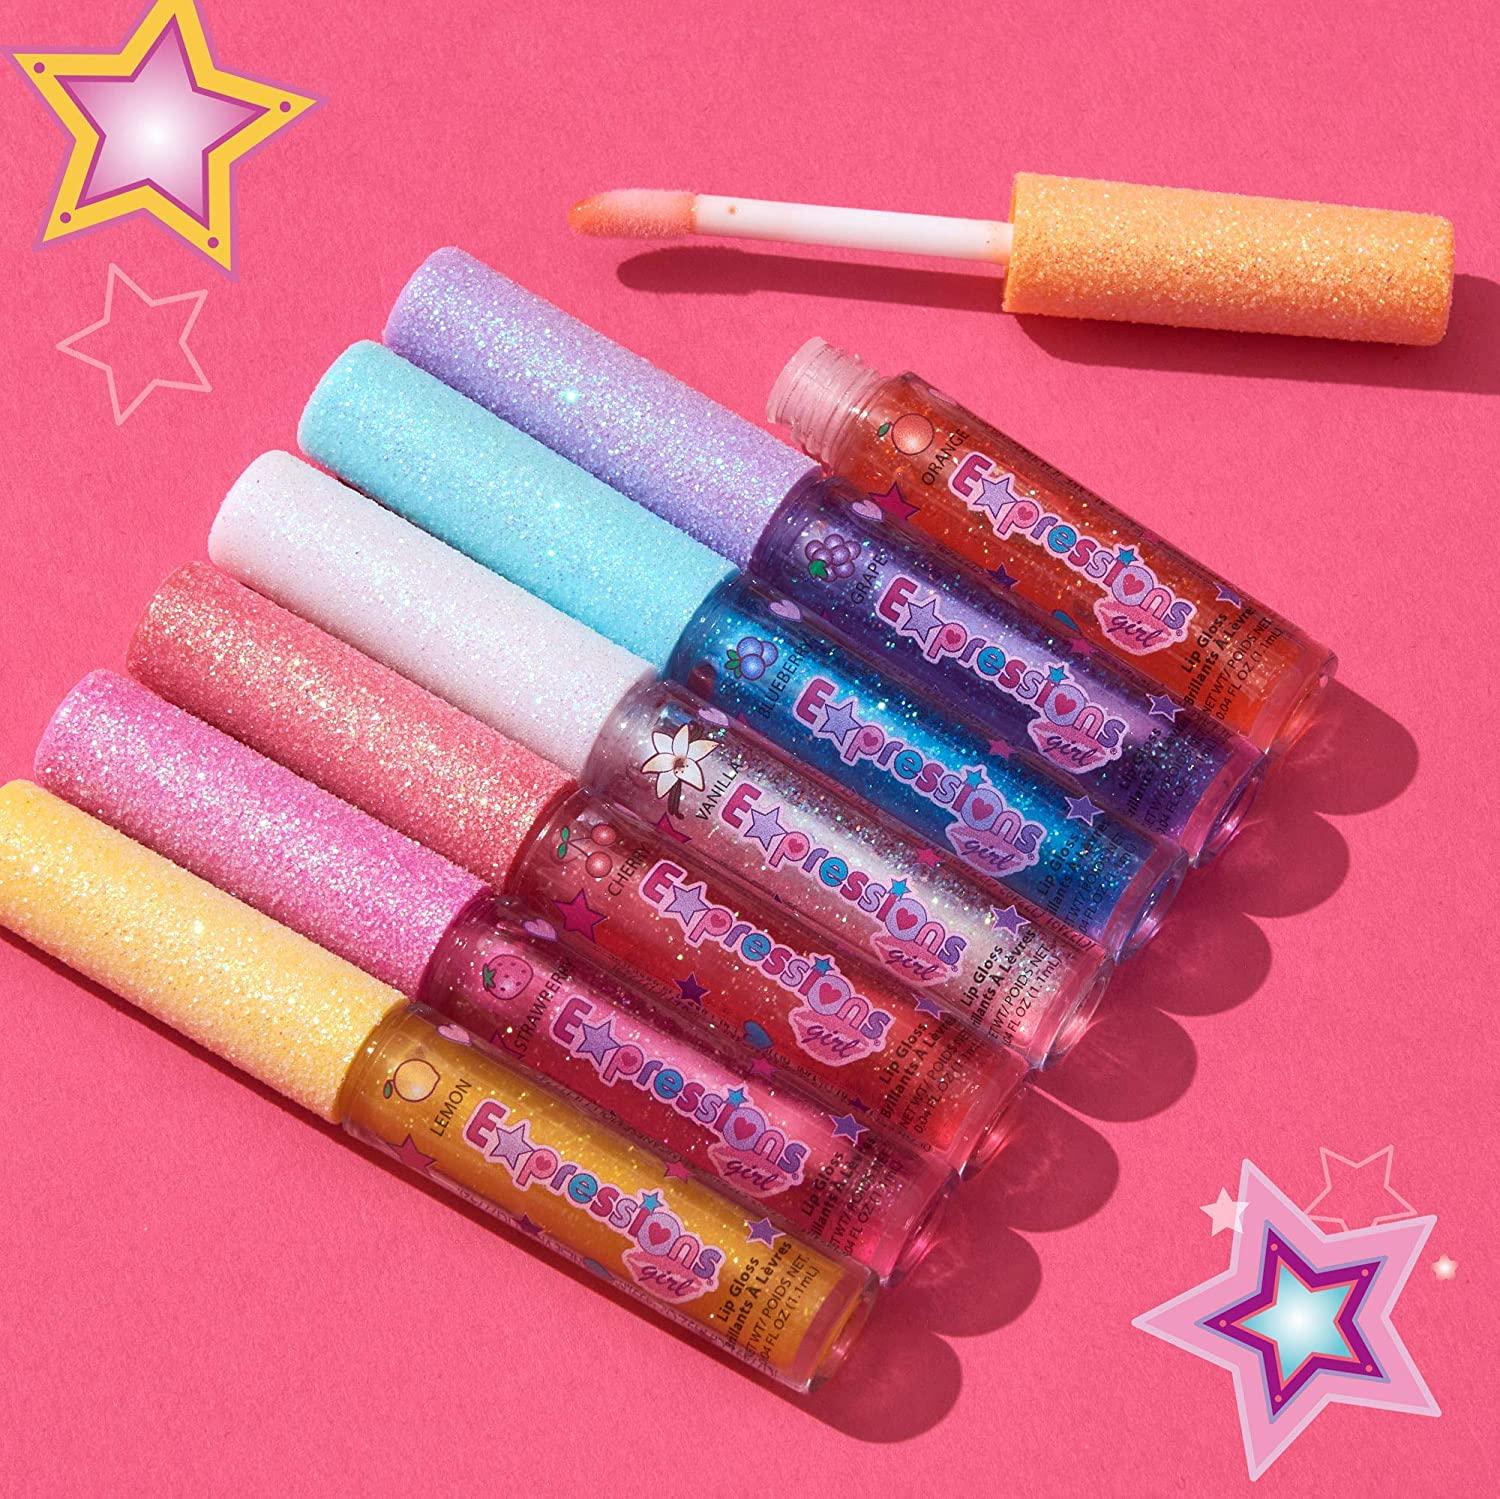 Expressions Kids Teen Girls Ladies & Womens 7 Piece Lip Gloss Wand Set,  Glittery Fruity Flavors, Ages 5+ Fruity Flavors, Non Toxic, Kid Friendly,  Party Gift, Best Friend 7 Count (Pack of 1)